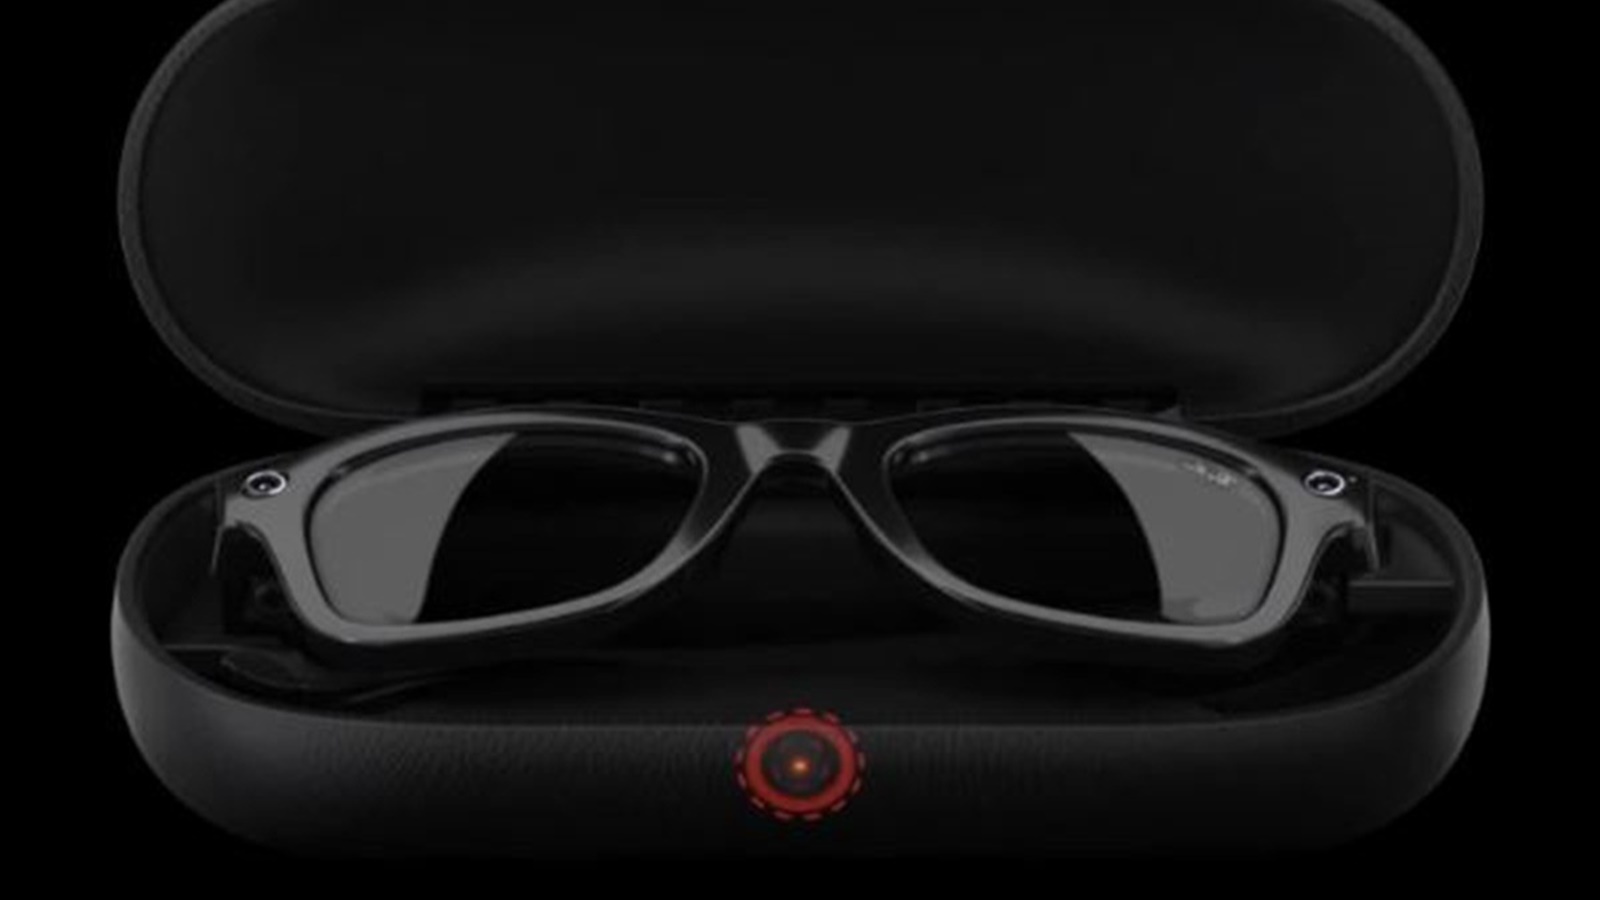 Meta’s Ray-Ban smart glasses can now recognise landmarks | Technology News